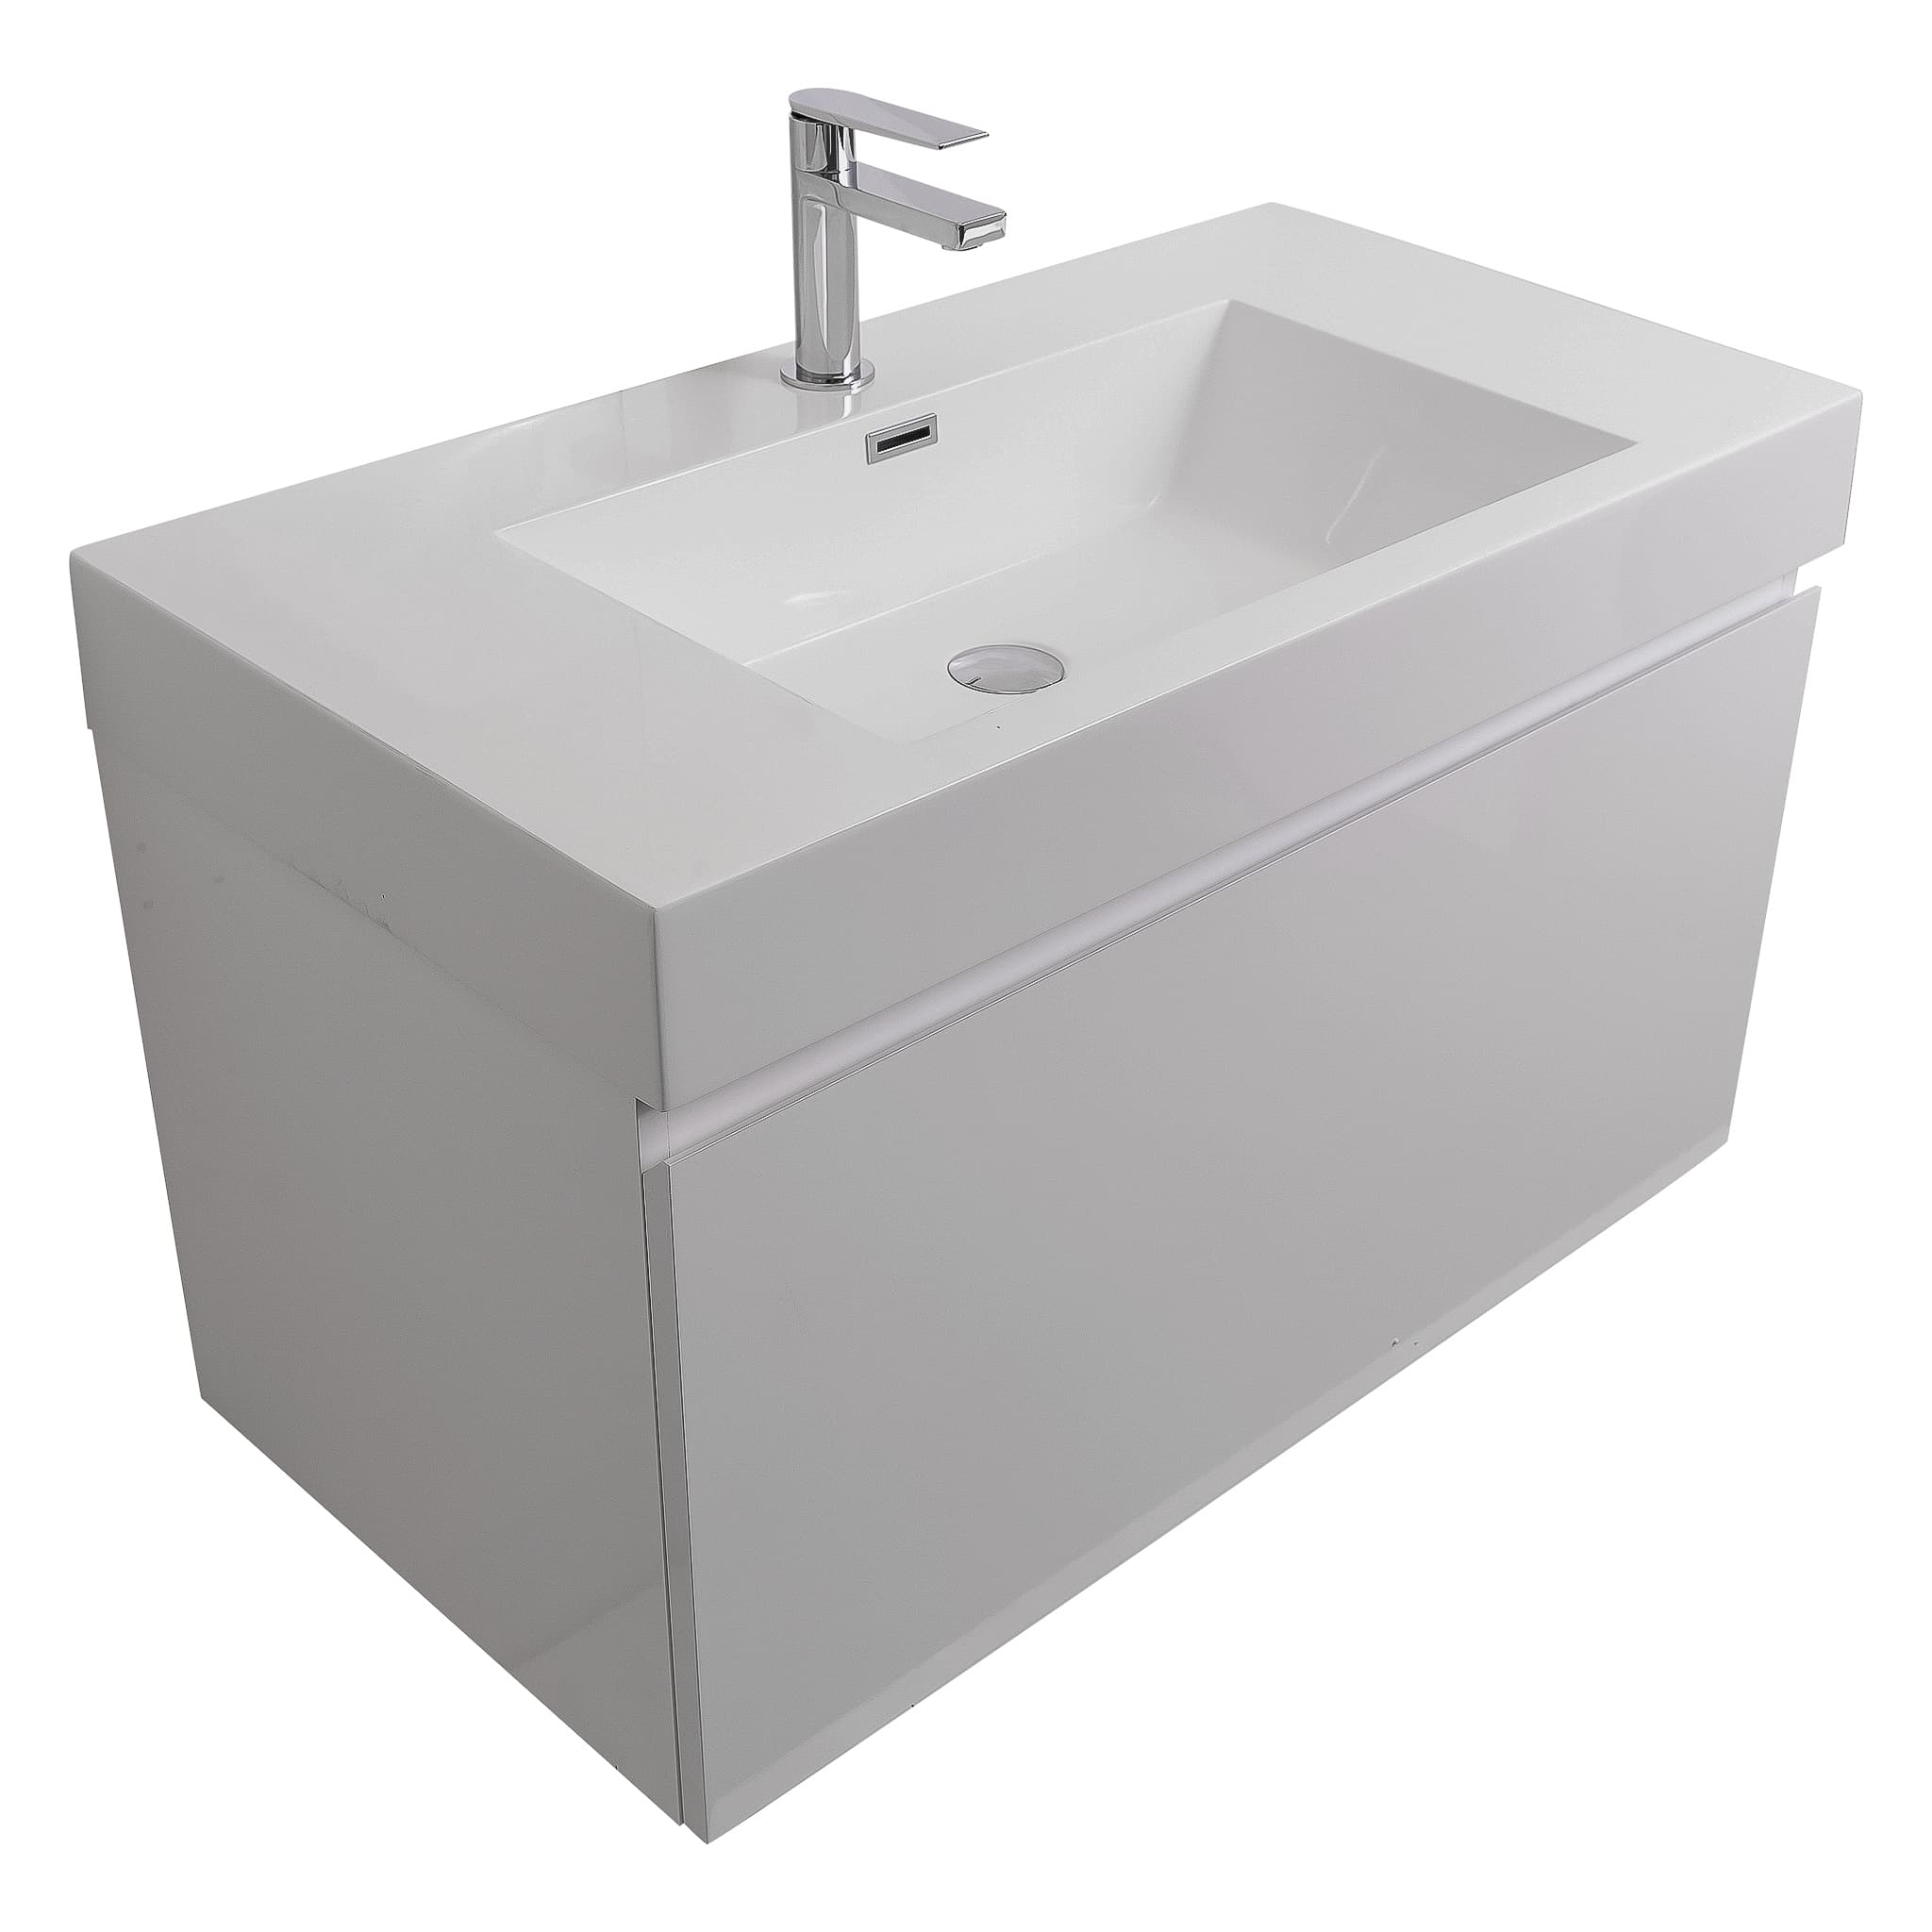 Venice 31.5 White High Gloss Cabinet, Square Cultured Marble Sink, Wall Mounted Modern Vanity Set